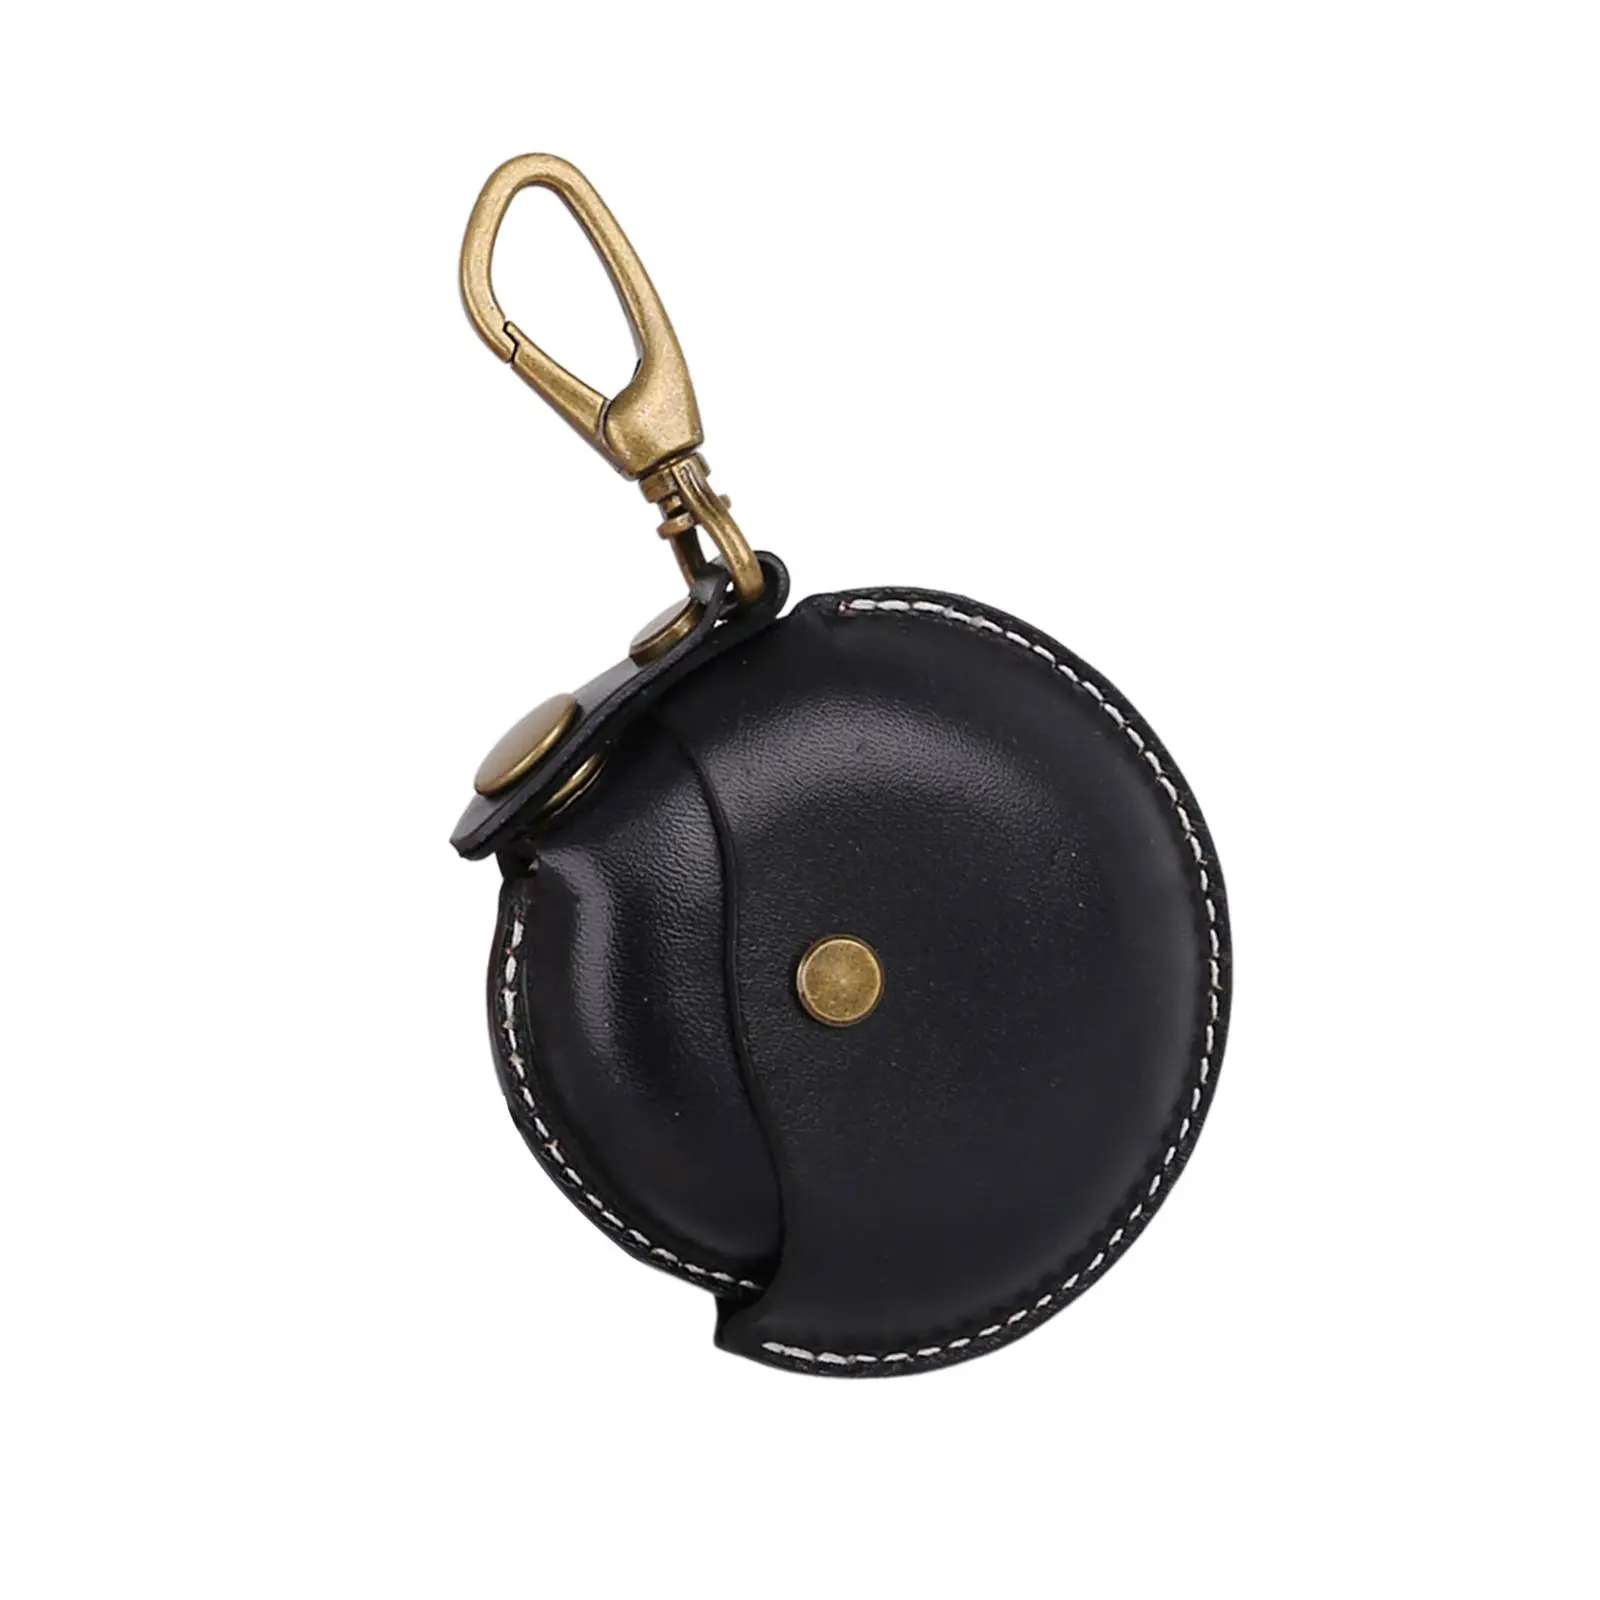 Artificial Leather Pouch Belt Costume Accessory Carry Retro Jewelry Wallet for Adults Women Men